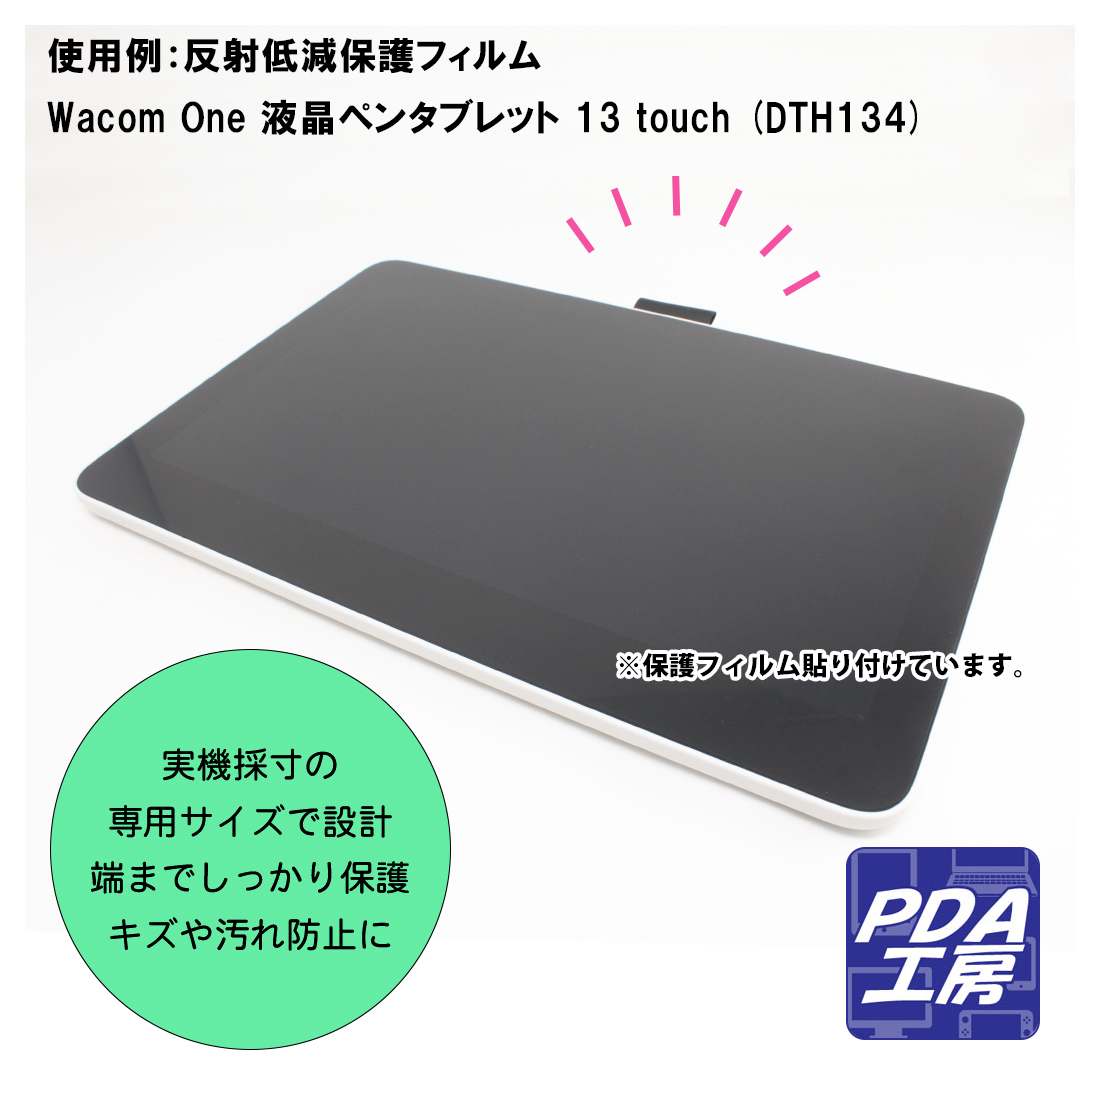 Wacom One 液晶ペンタブレット 13 touch (DTH134) 対応 9H高硬度[光沢] 保護 フィルム 日本製｜pdar｜03